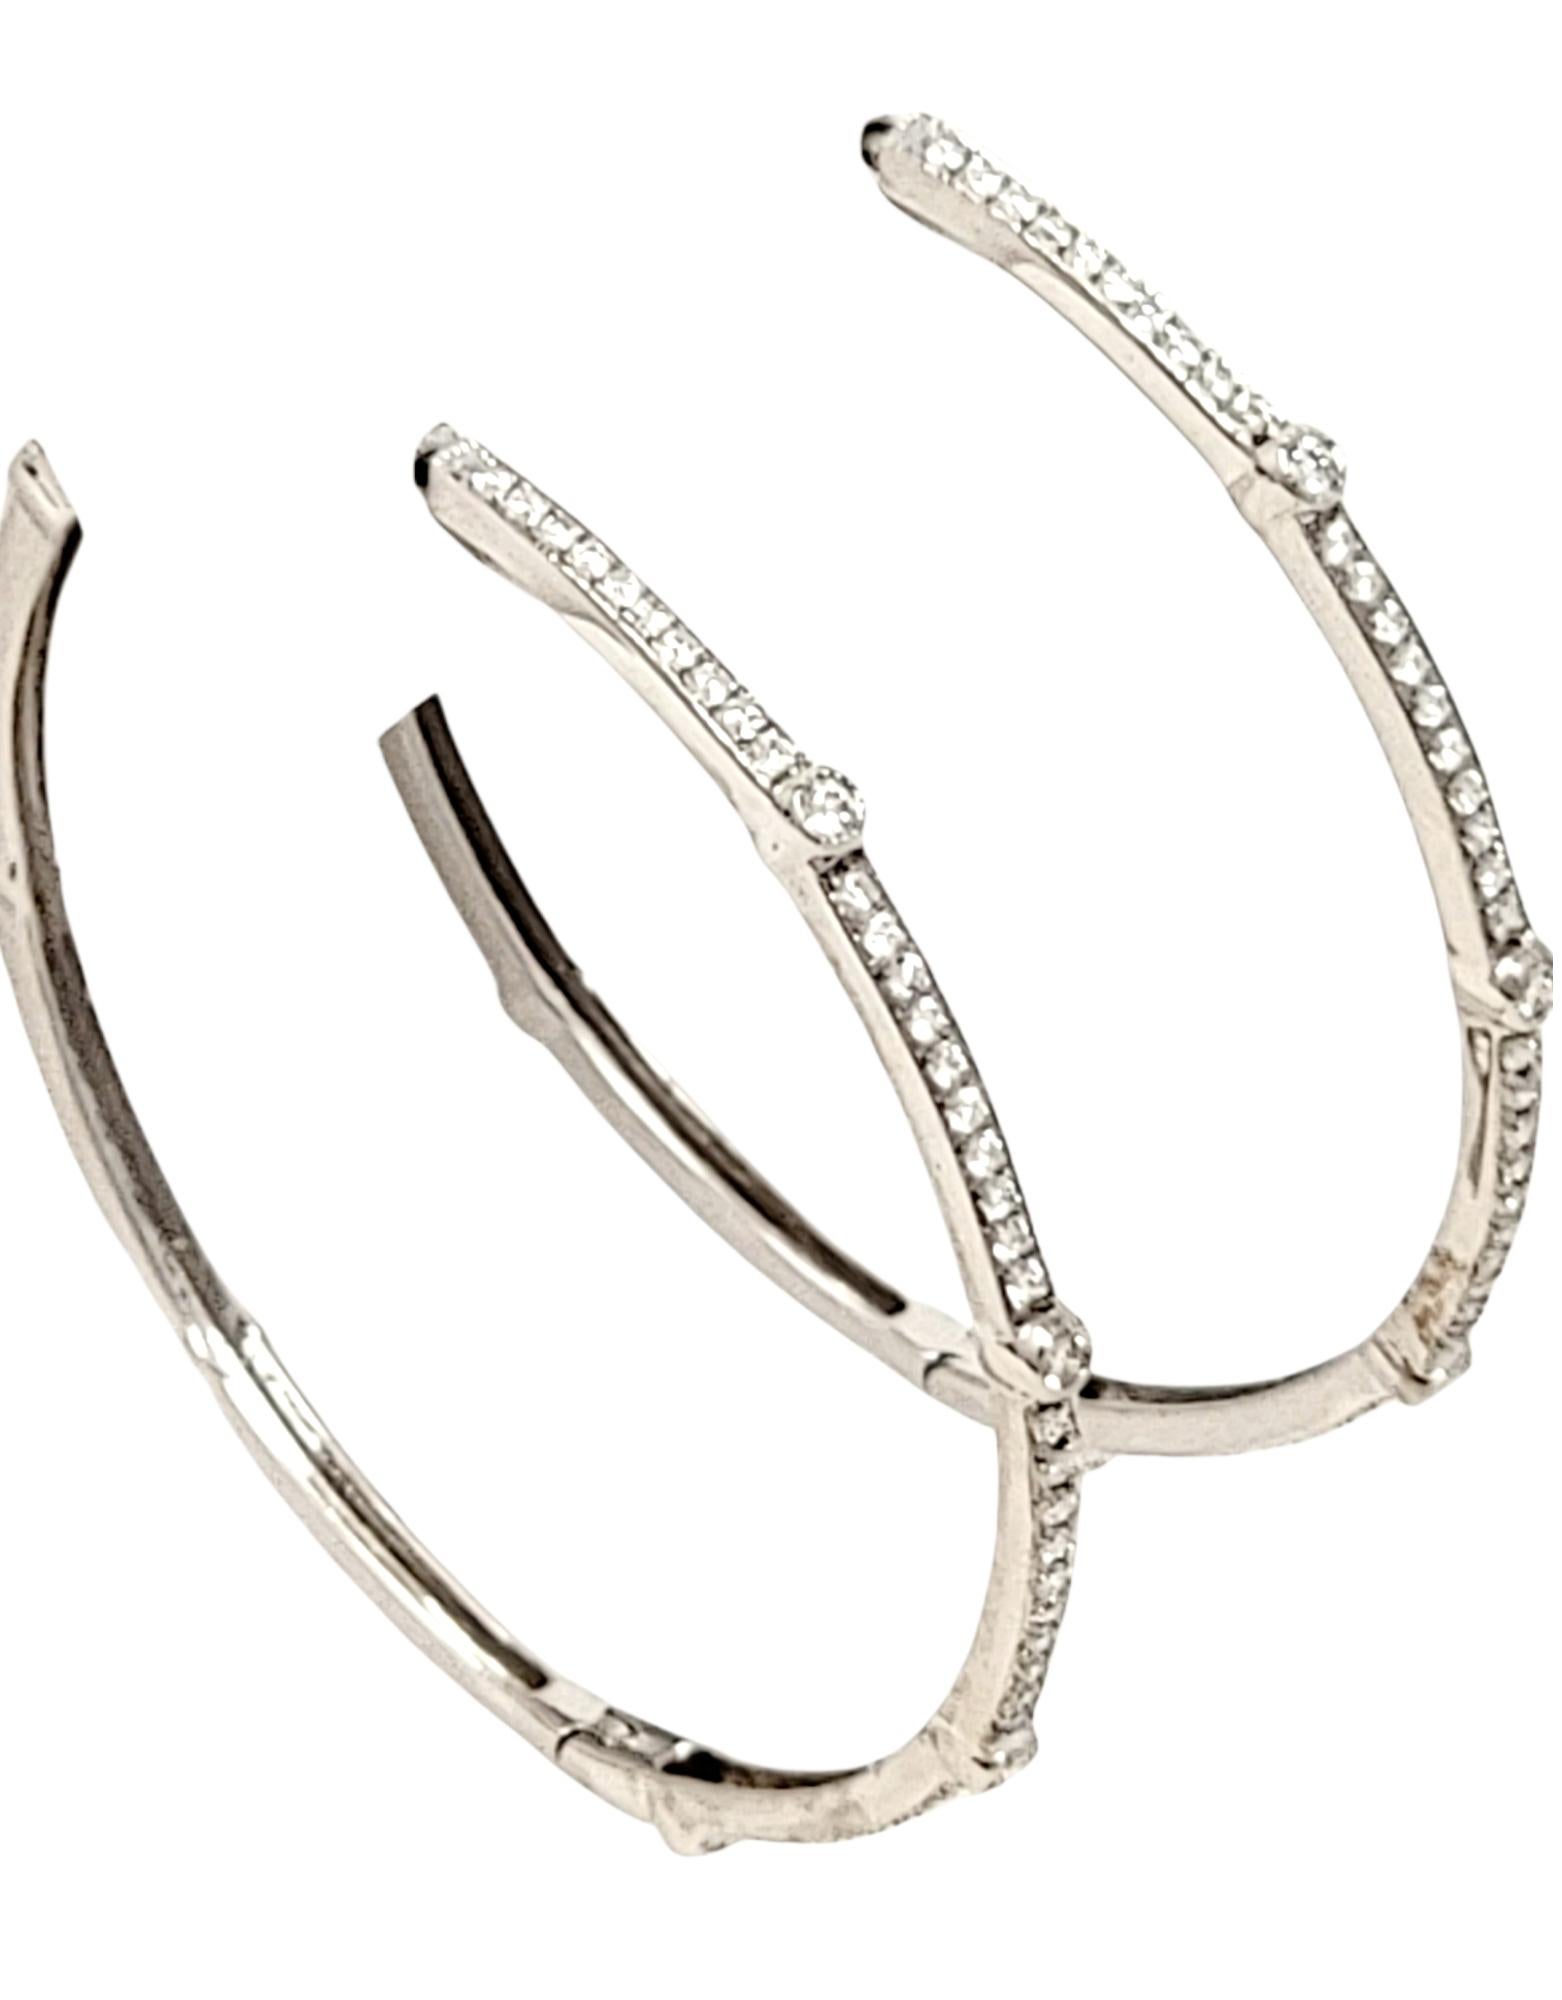 .75 Carats Total Round Diamond Station Hoop Earrings 18 Karat White Gold In Good Condition For Sale In Scottsdale, AZ